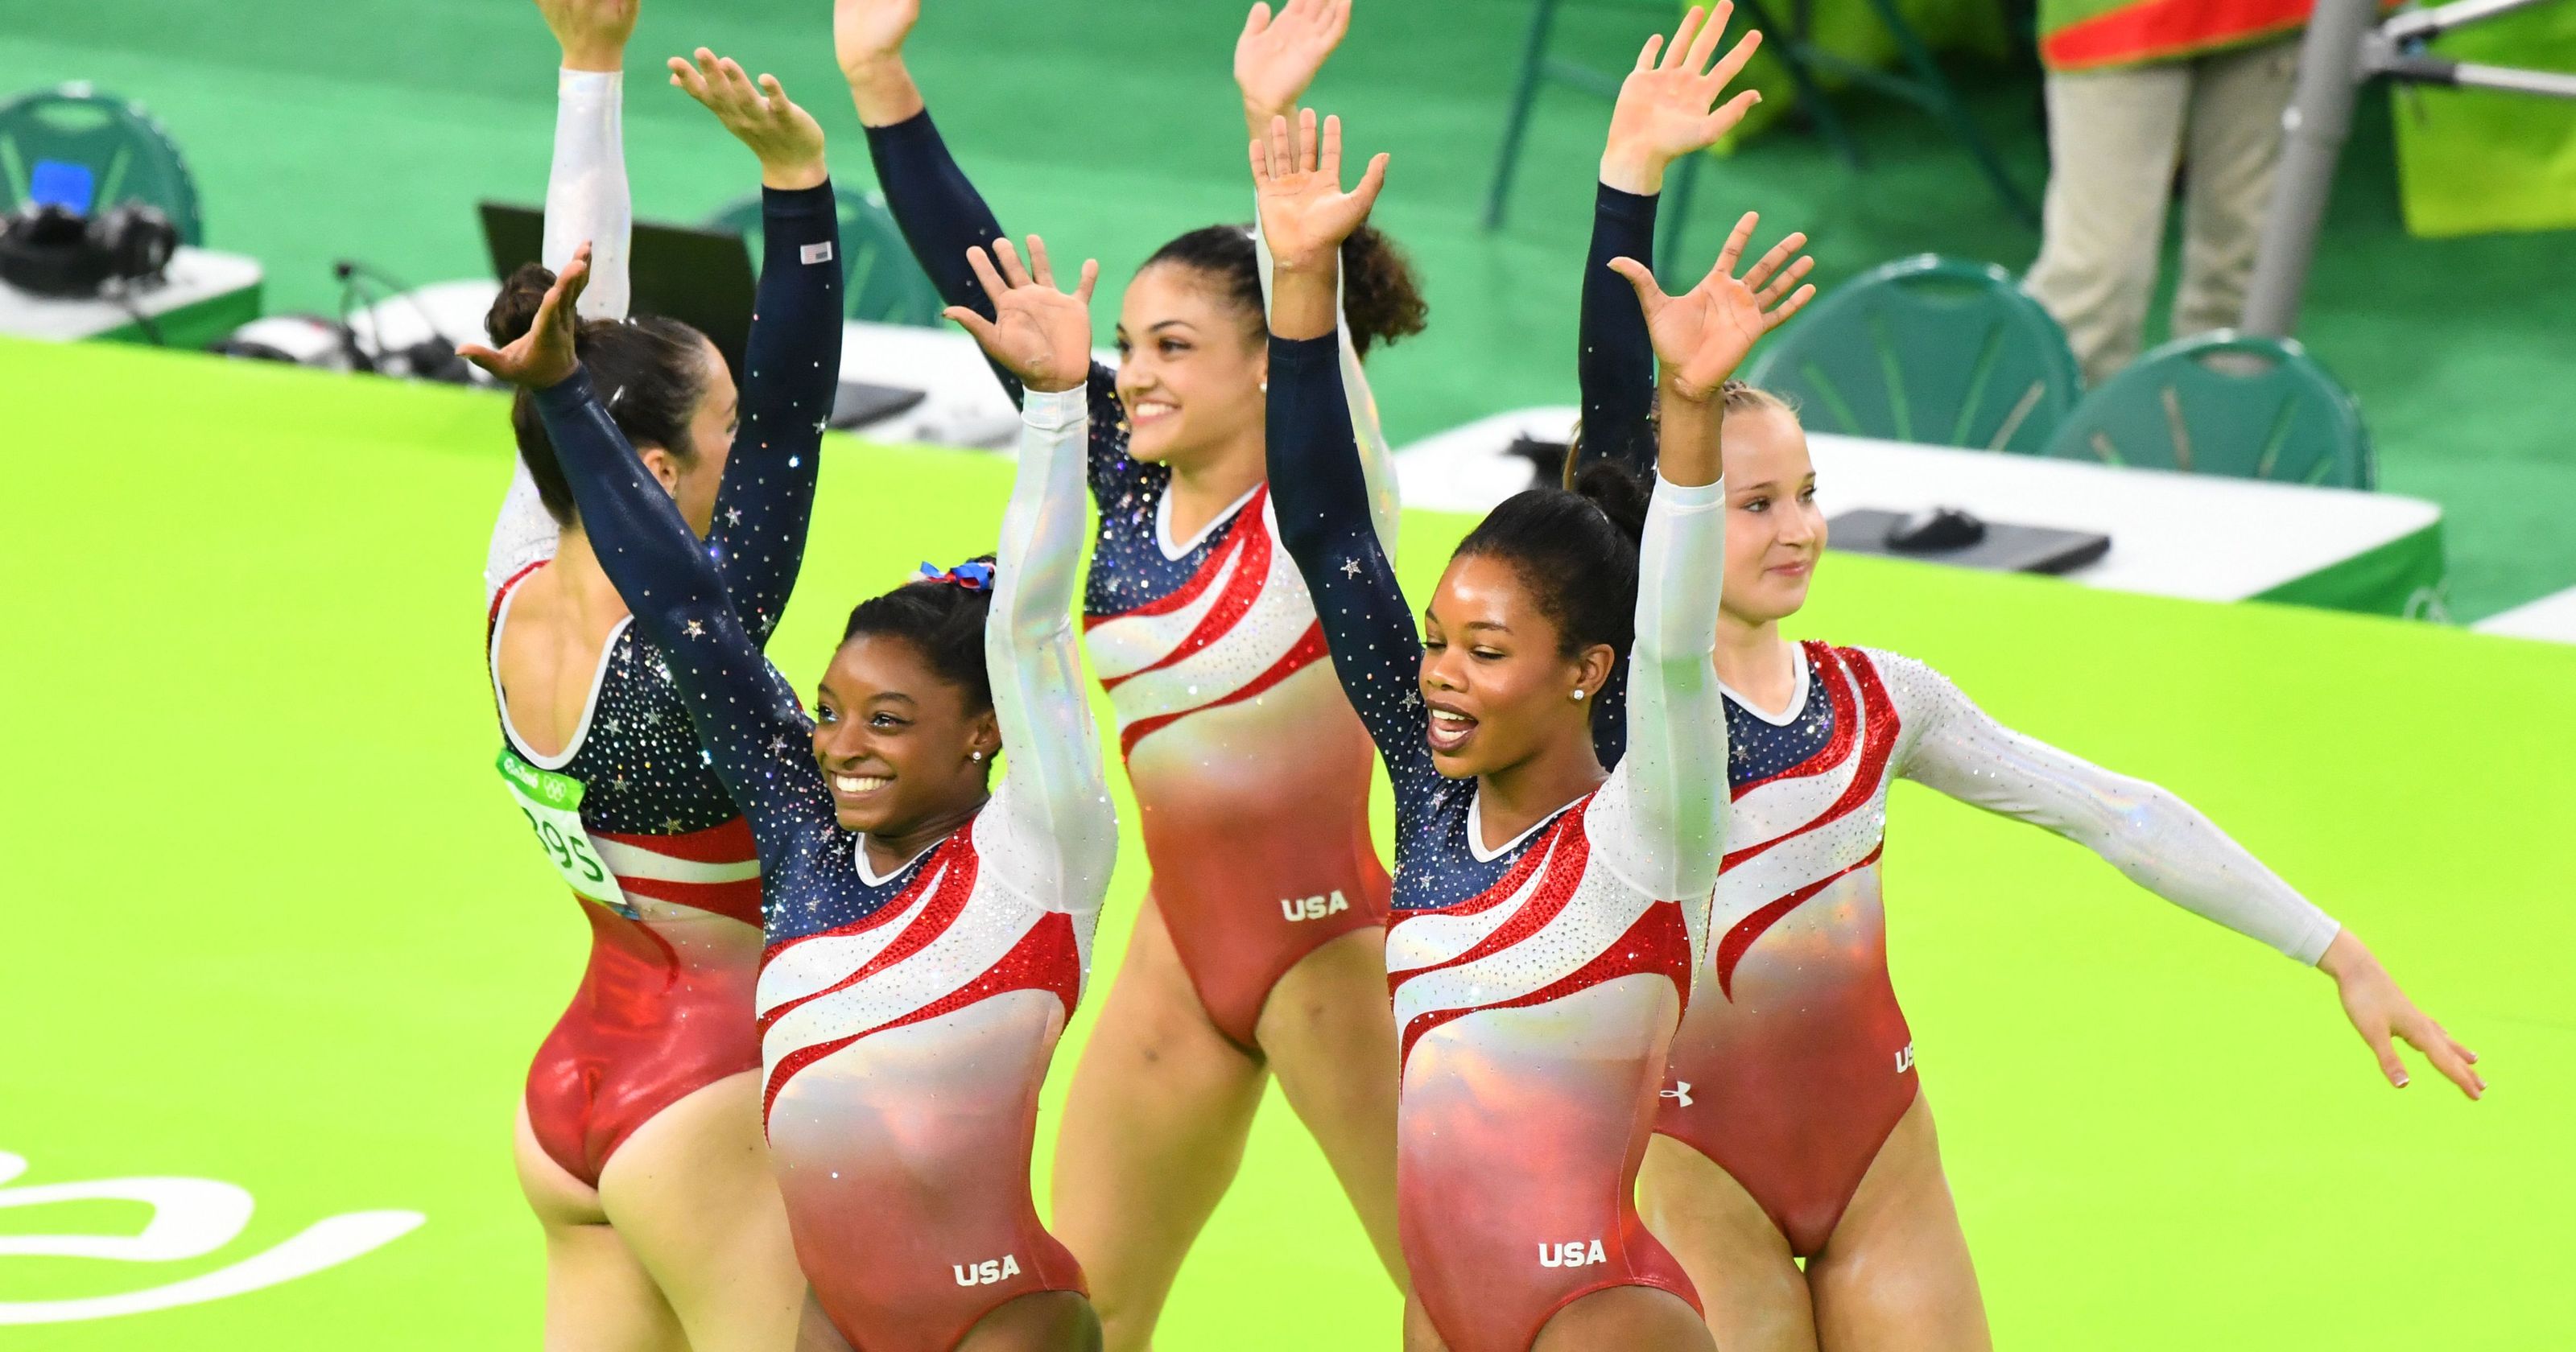 Fans of all types cheer on USA Gymnastics at team finals